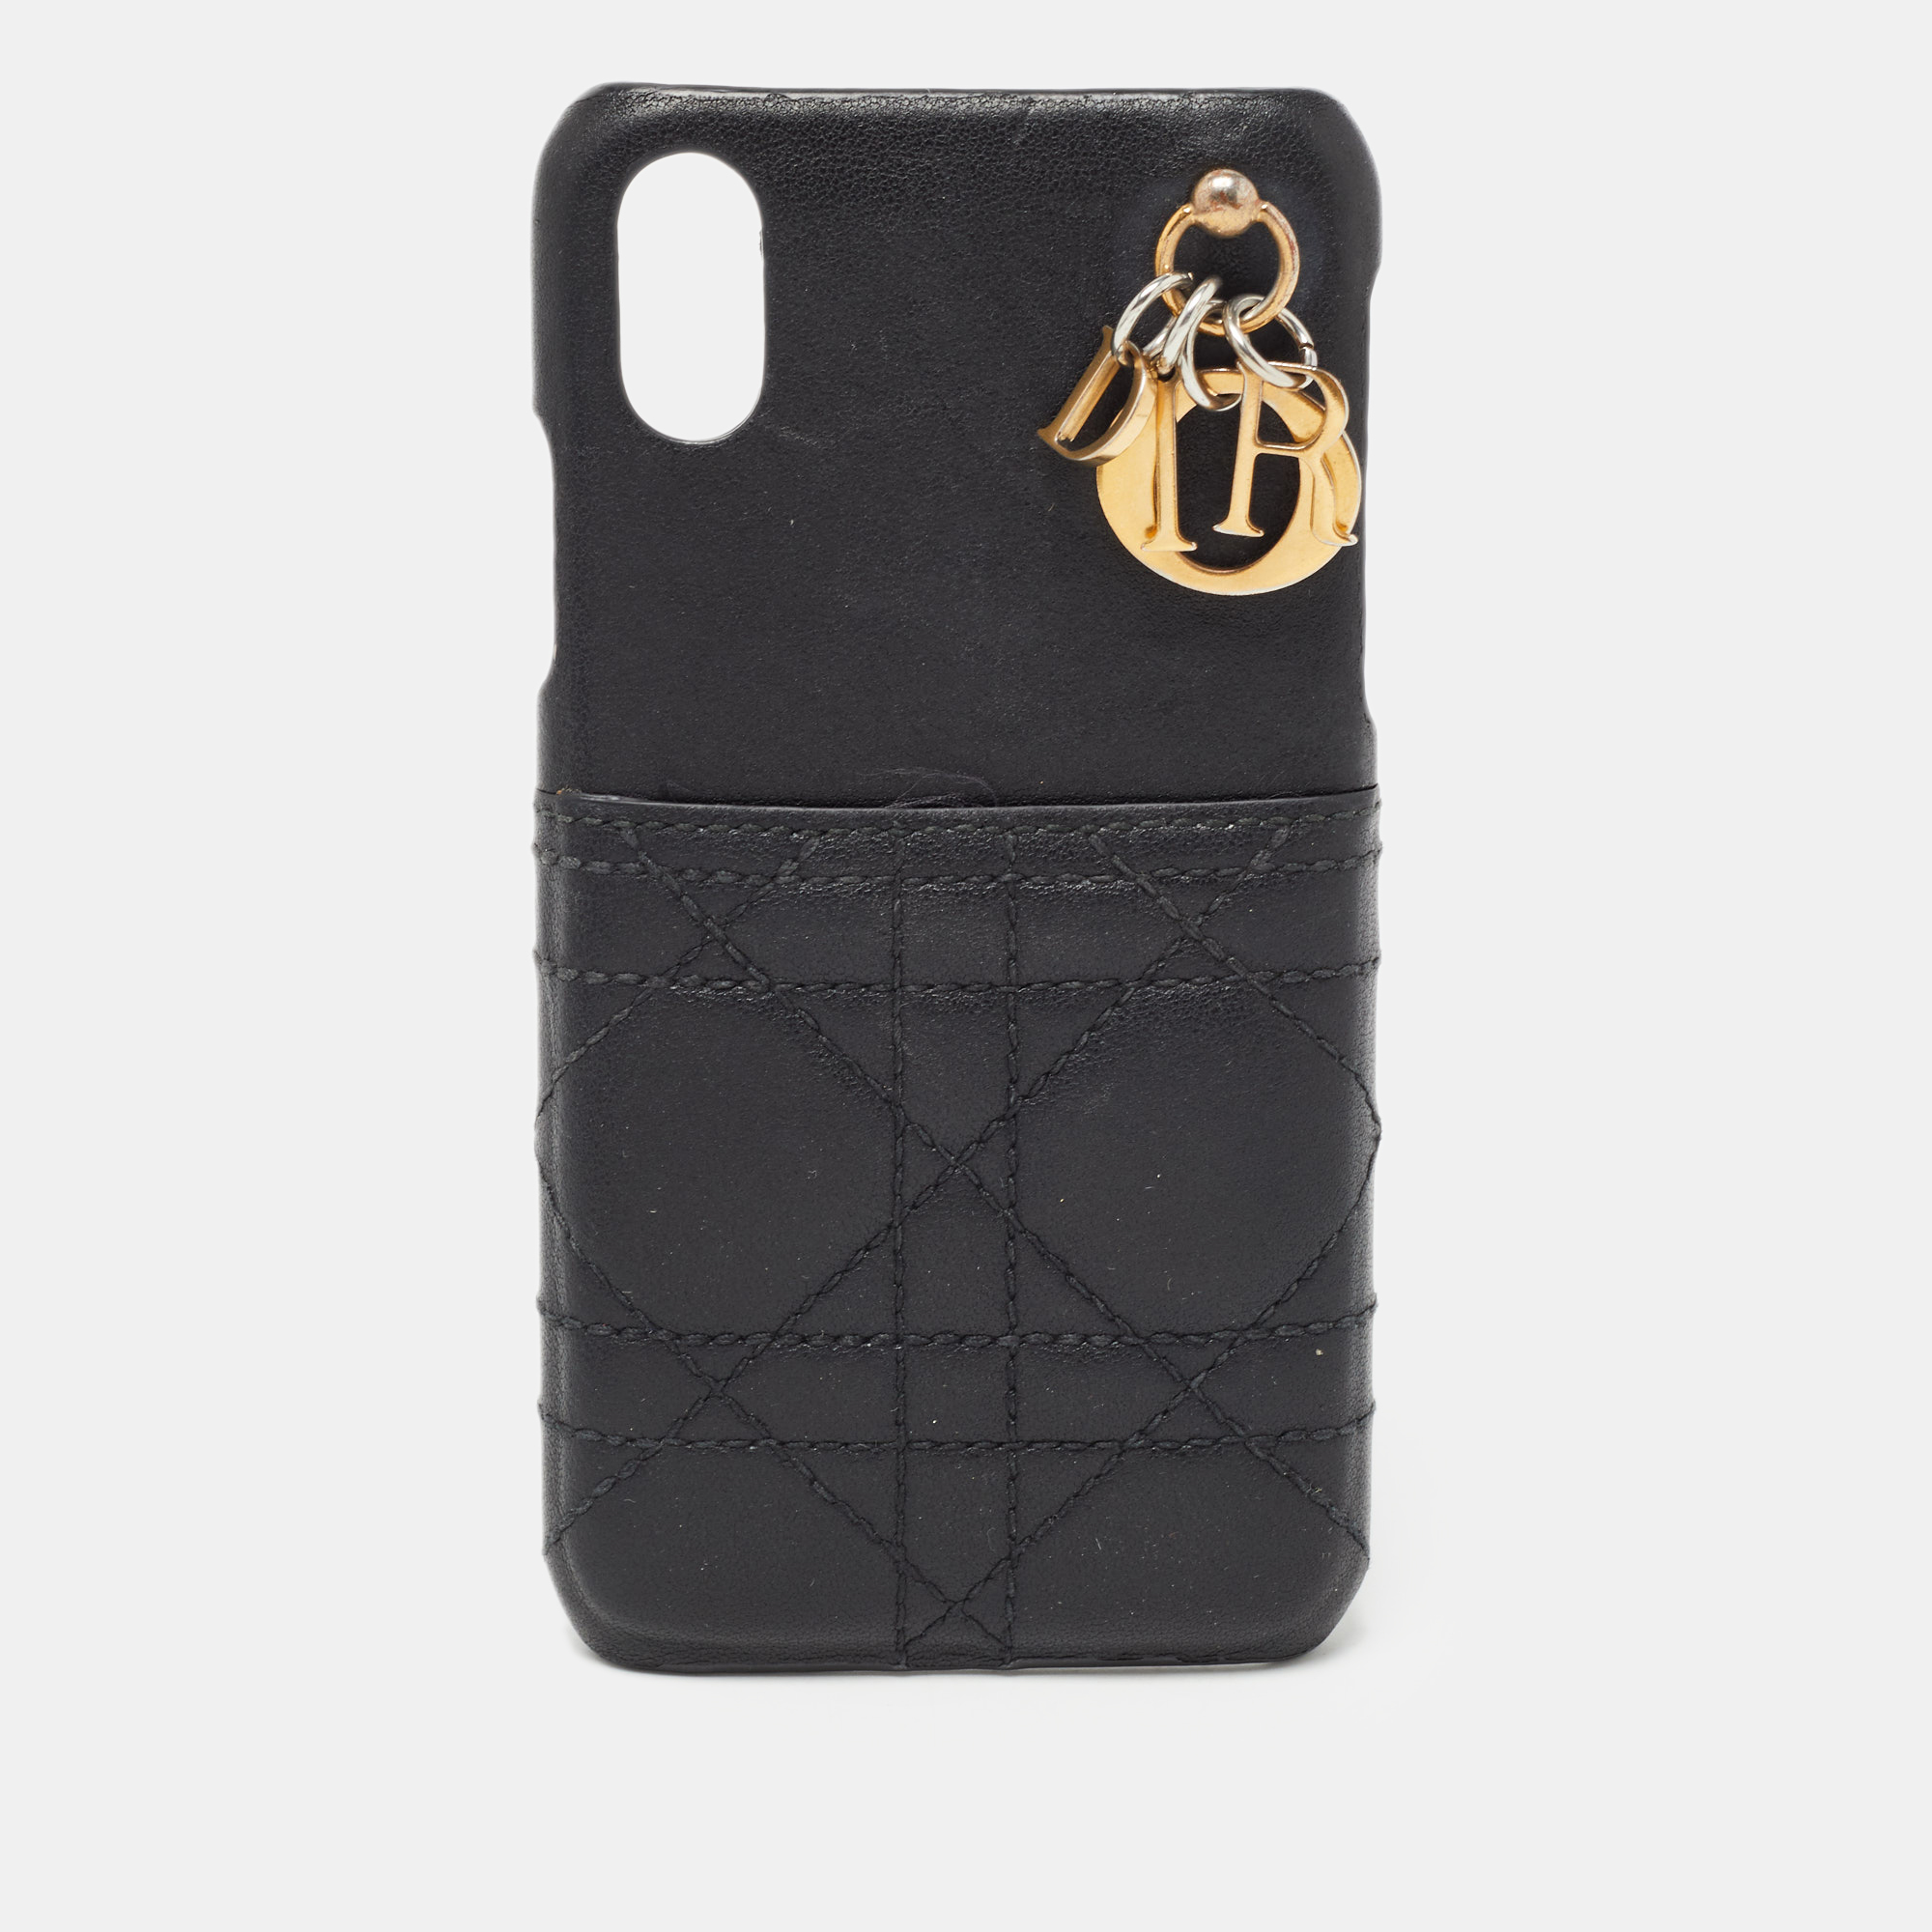 Dior black cannage leather lady dior iphone x case